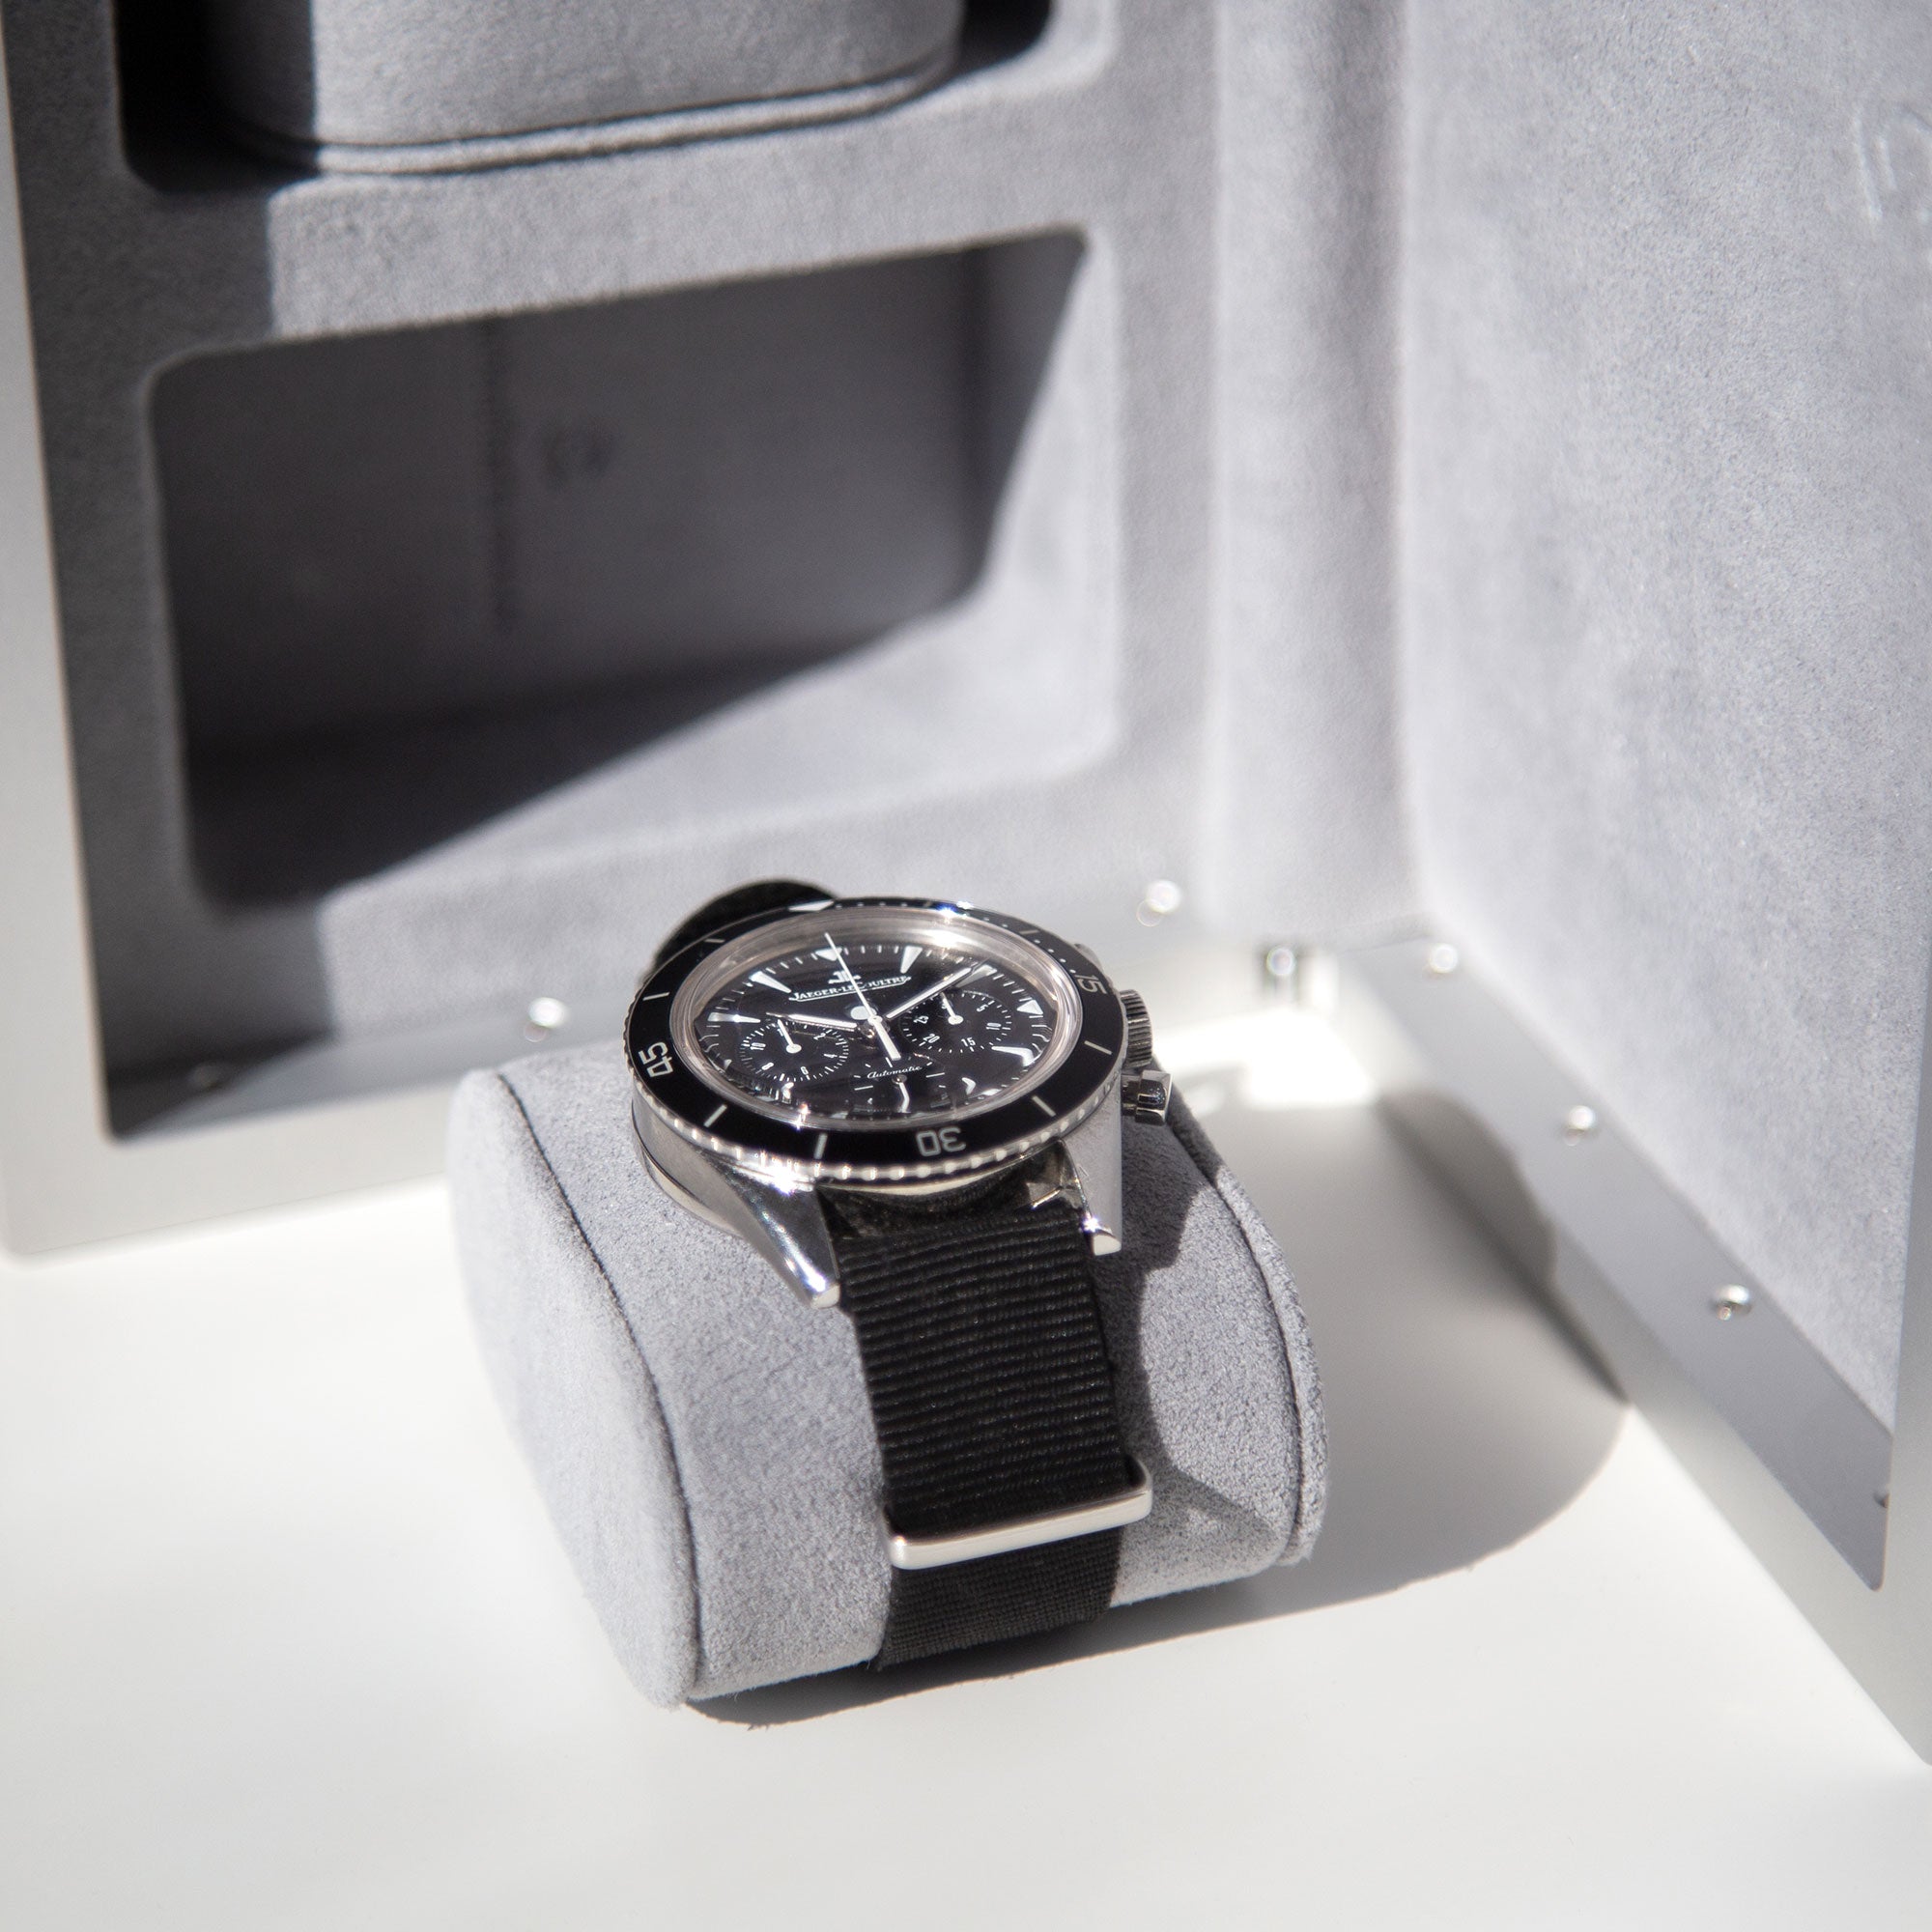 Luxury men's watch placed on removable soft Alcantara cushion from the Eaton 3 watch travel case in cloud grey